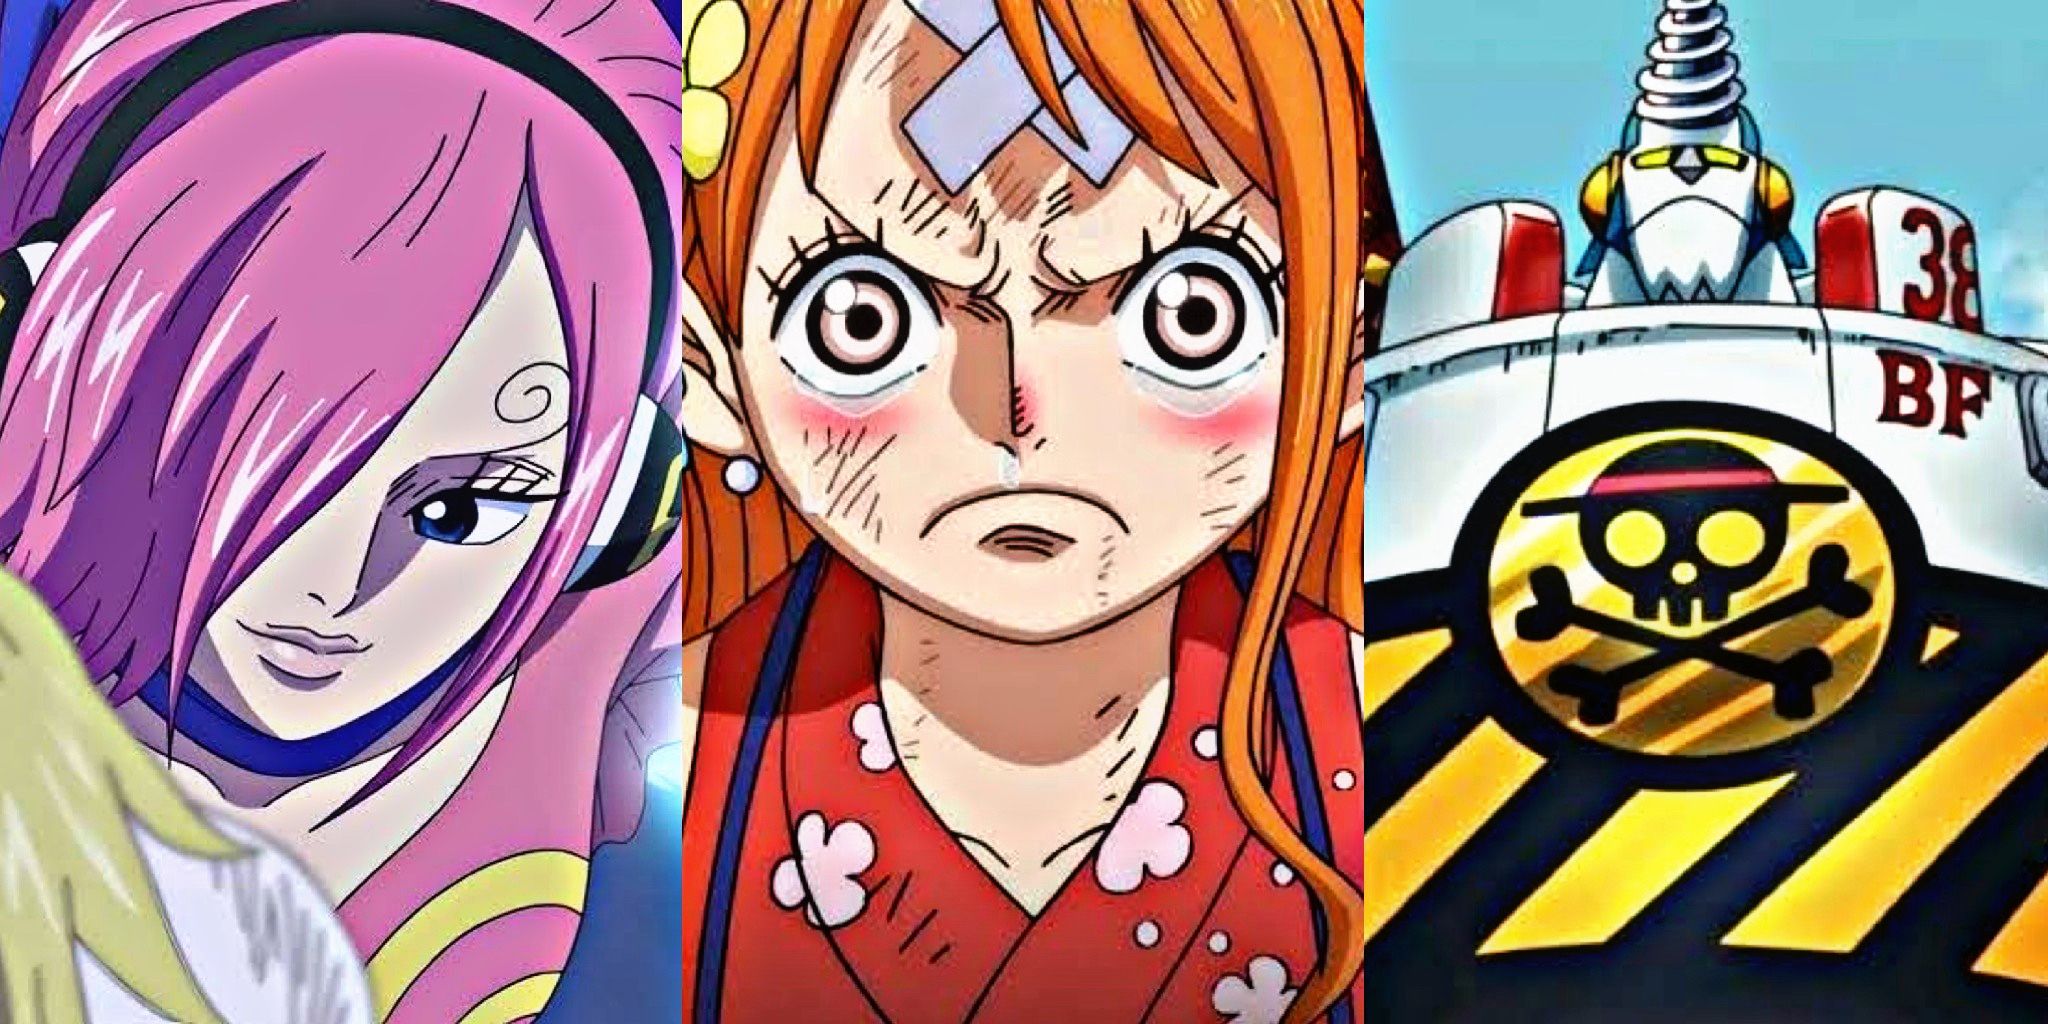 reiju nami franky strongest characters without haki or devil fruit one piece